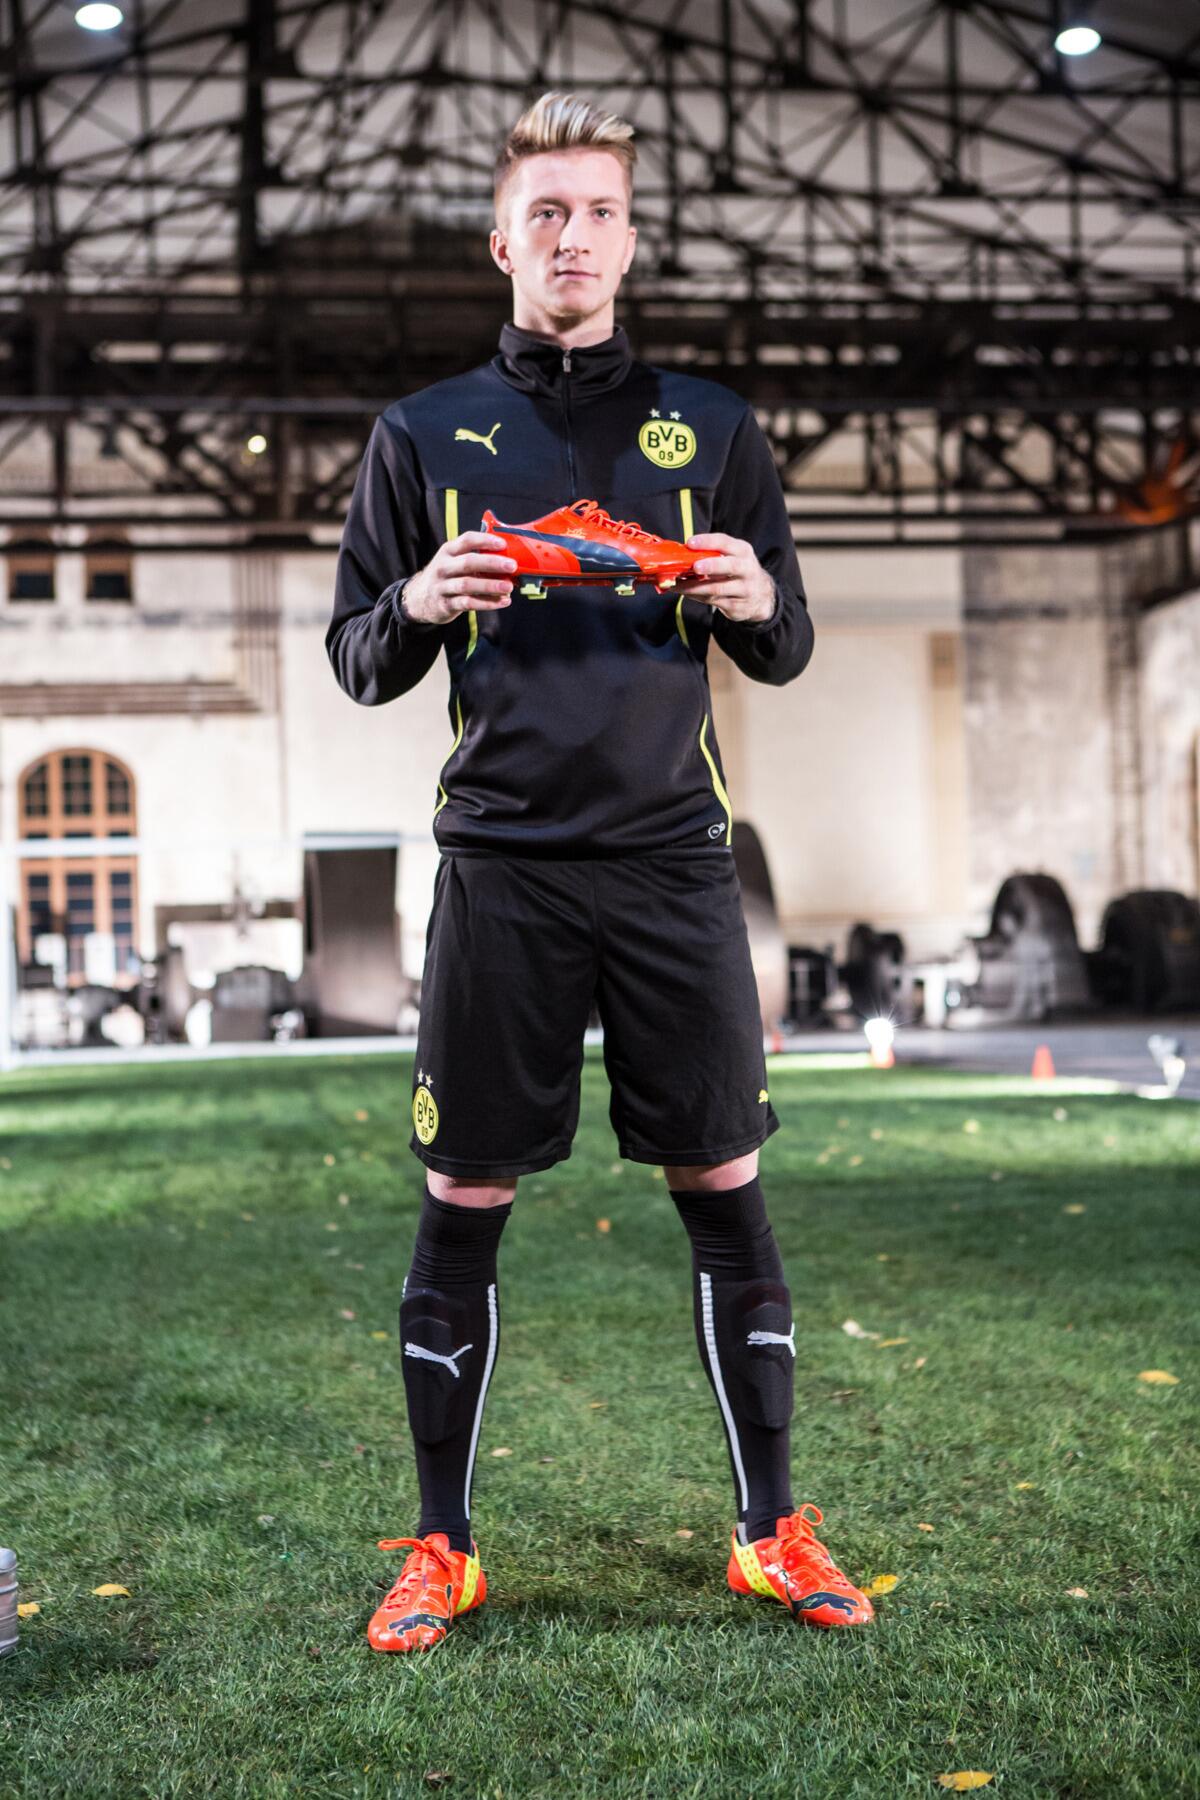 PUMA Football on X: "It's Bundesliga time again. Marco Reus is sporting new  #evoPOWER boots for the occasion. #StartBelieving http://t.co/6E6iEUhNqk" /  X